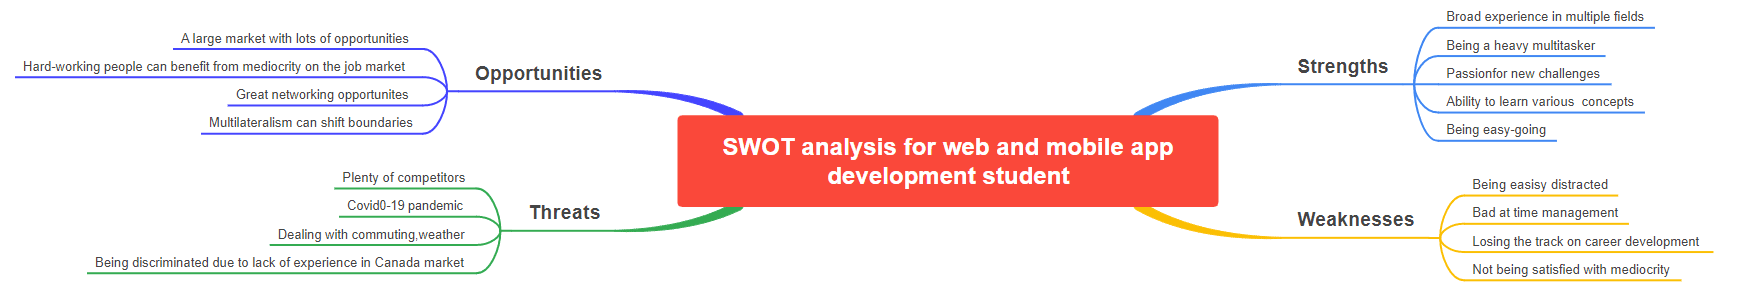 SWOT analysis for web and mobile app student